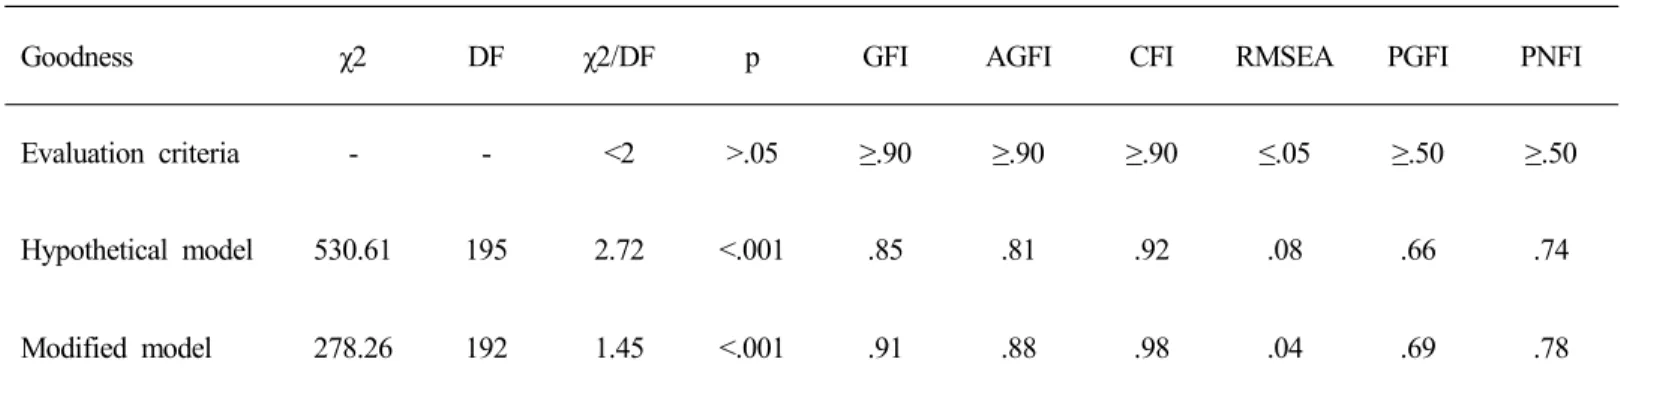 Table 1. Model Fitness Index for Hypothetical and Modified Model                                                                                 (N=248)